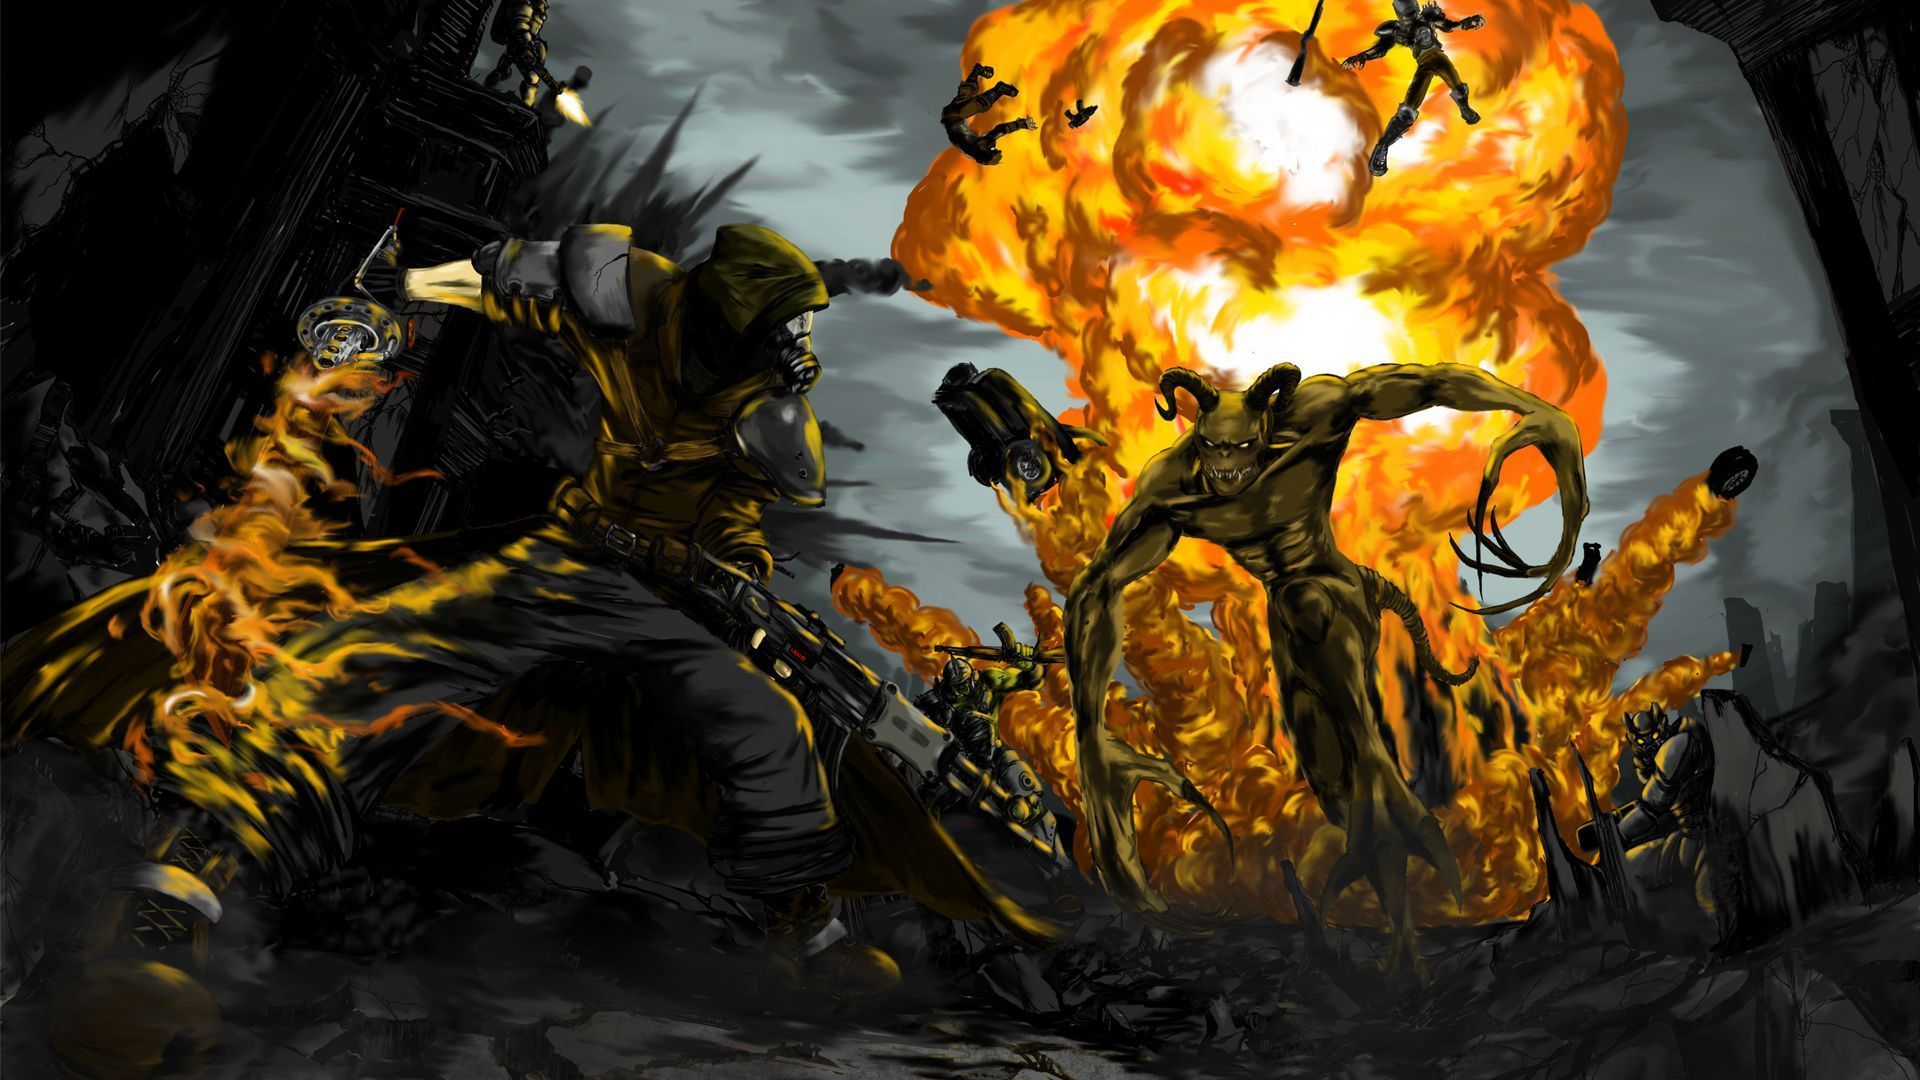 35 Fallout 3 HD Wallpapers | Backgrounds - Wallpaper Abyss